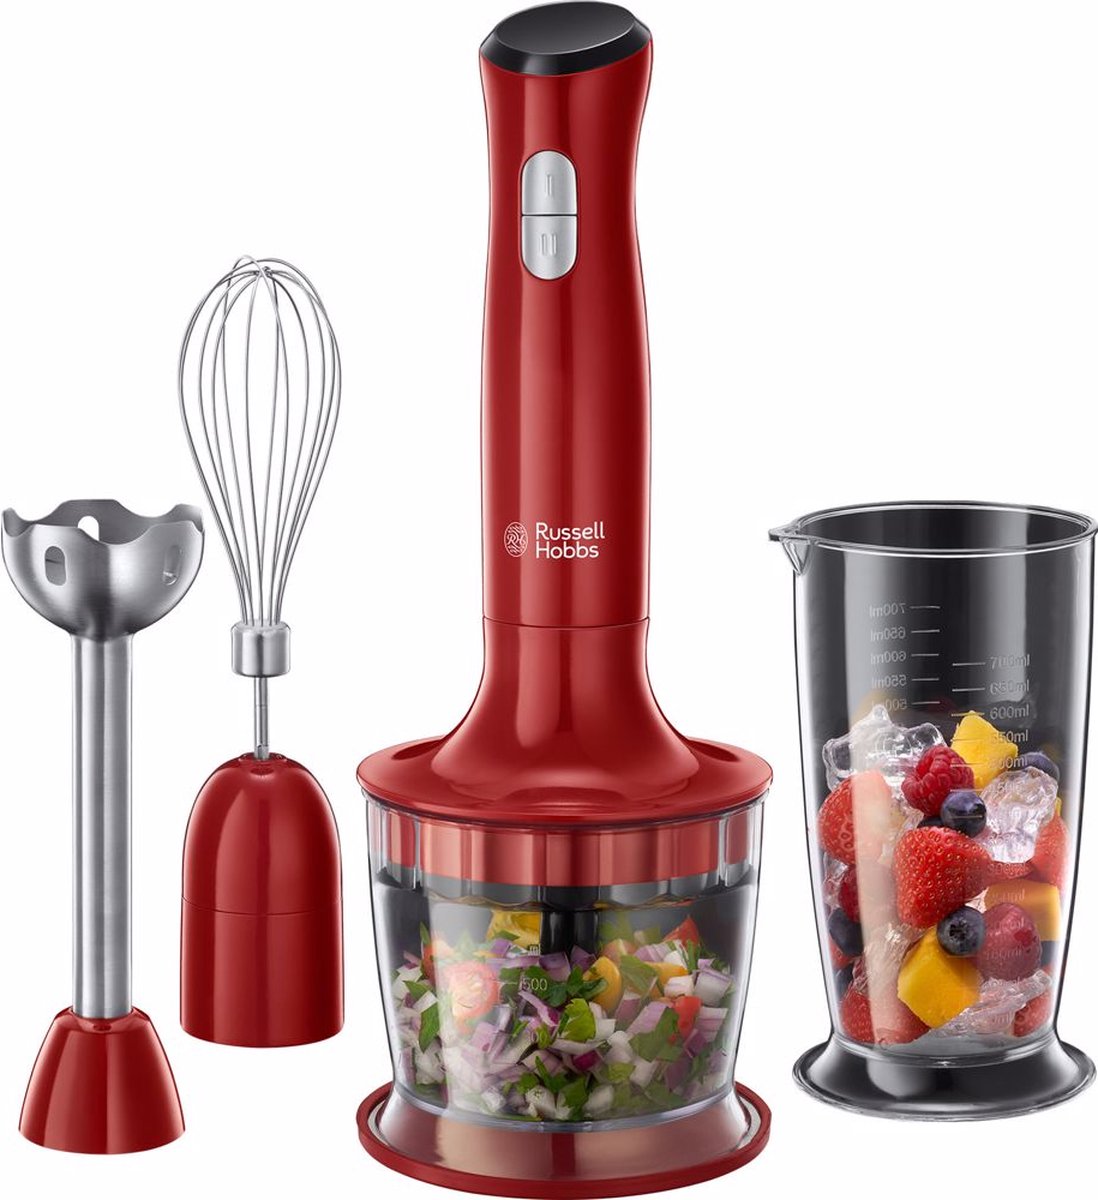 Russell Hobbs 24700-56 Desire 3-in-1 Staafmixer - Rood | bol.com